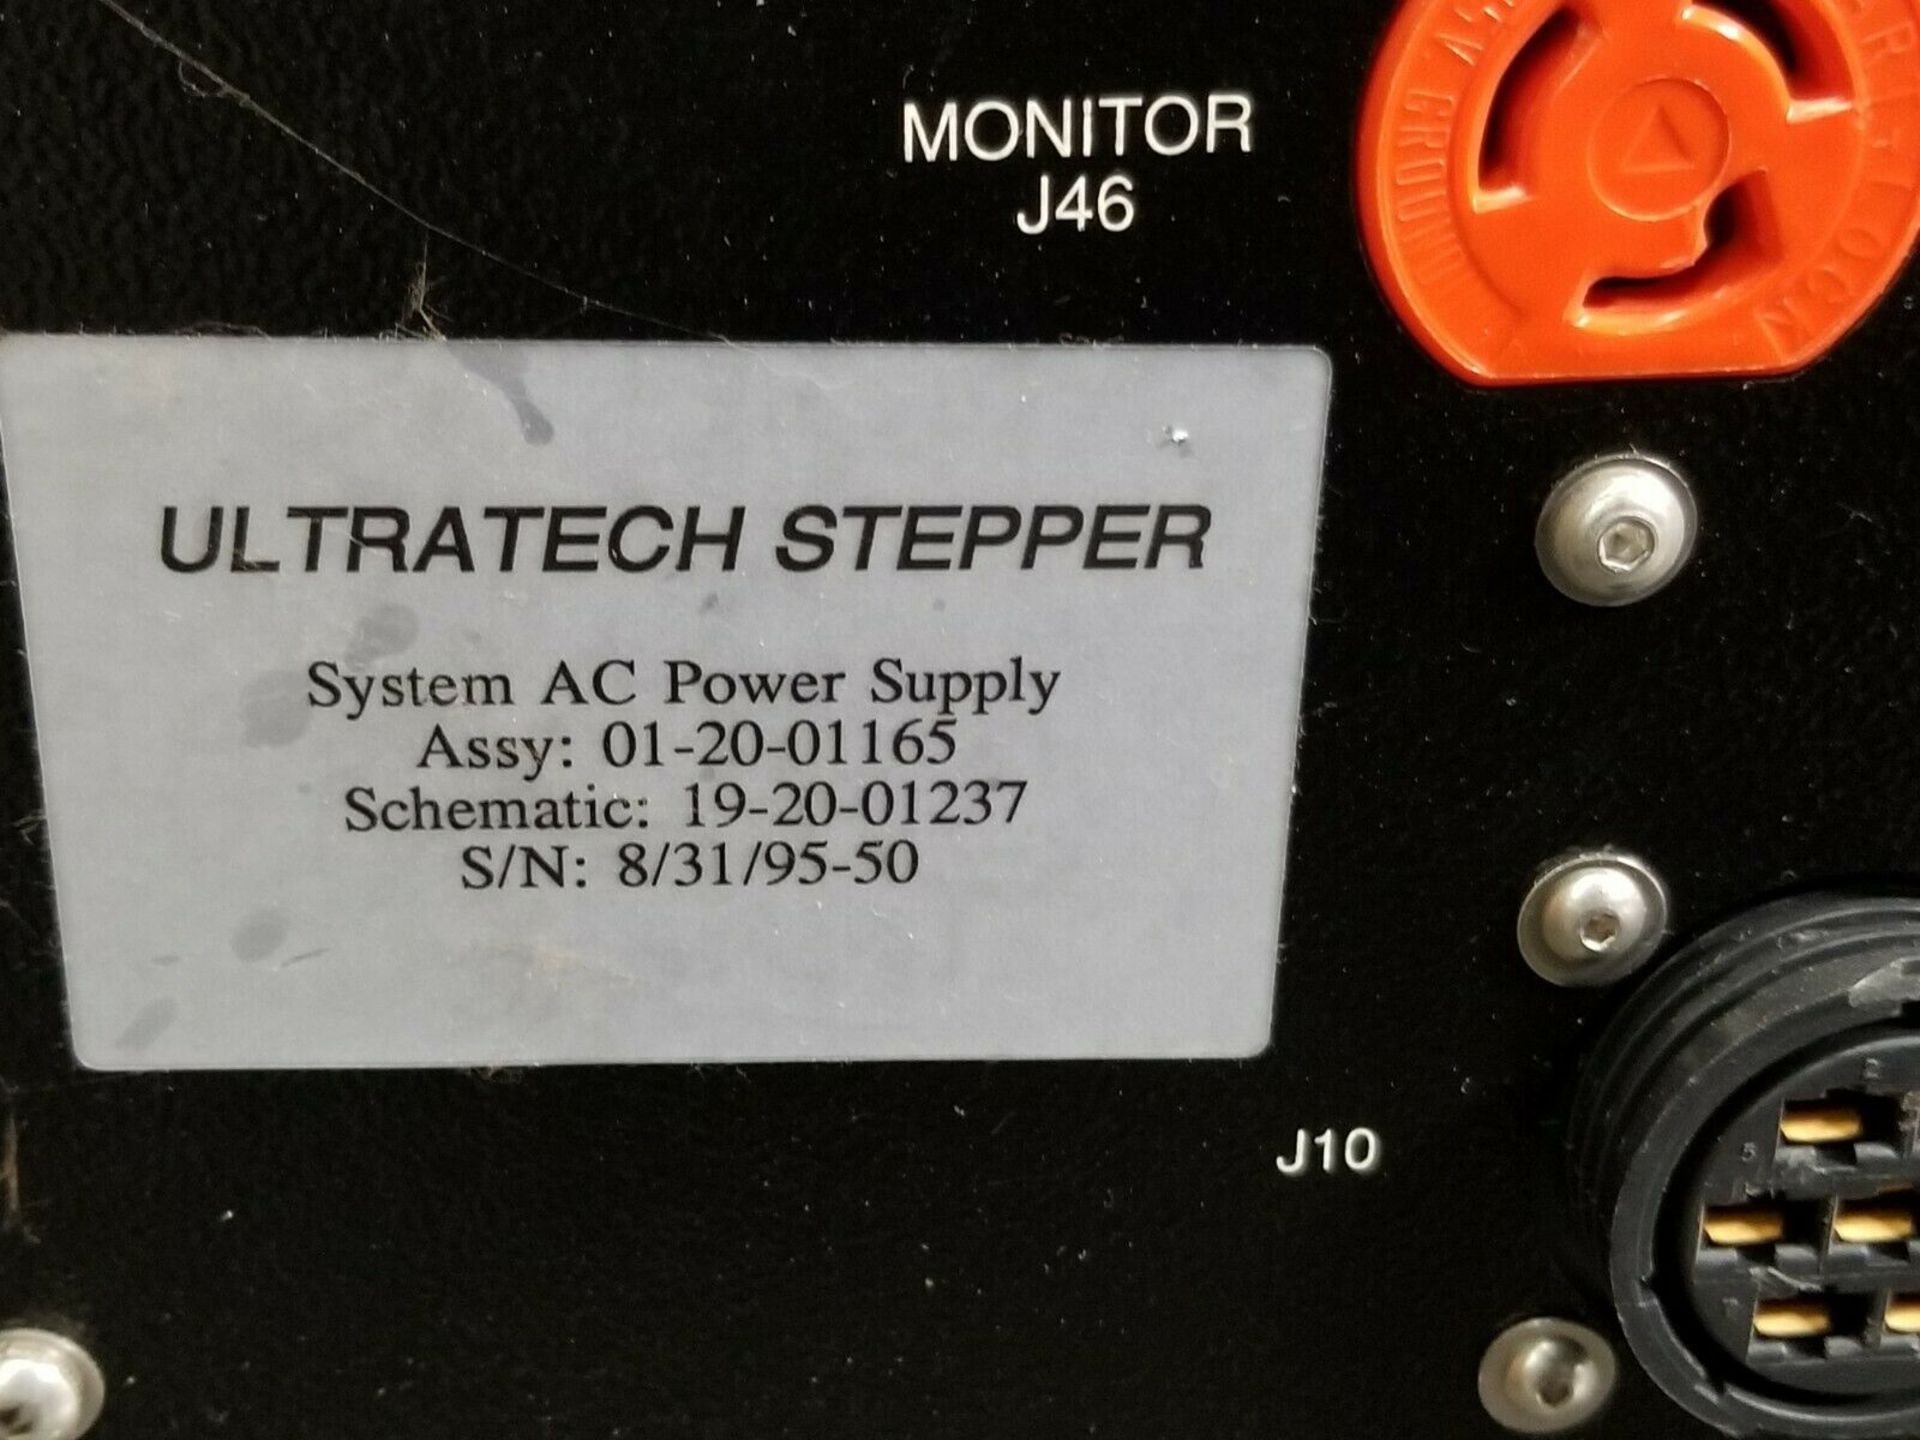 Ultratech Stepper System AC Power Supply - Image 5 of 6